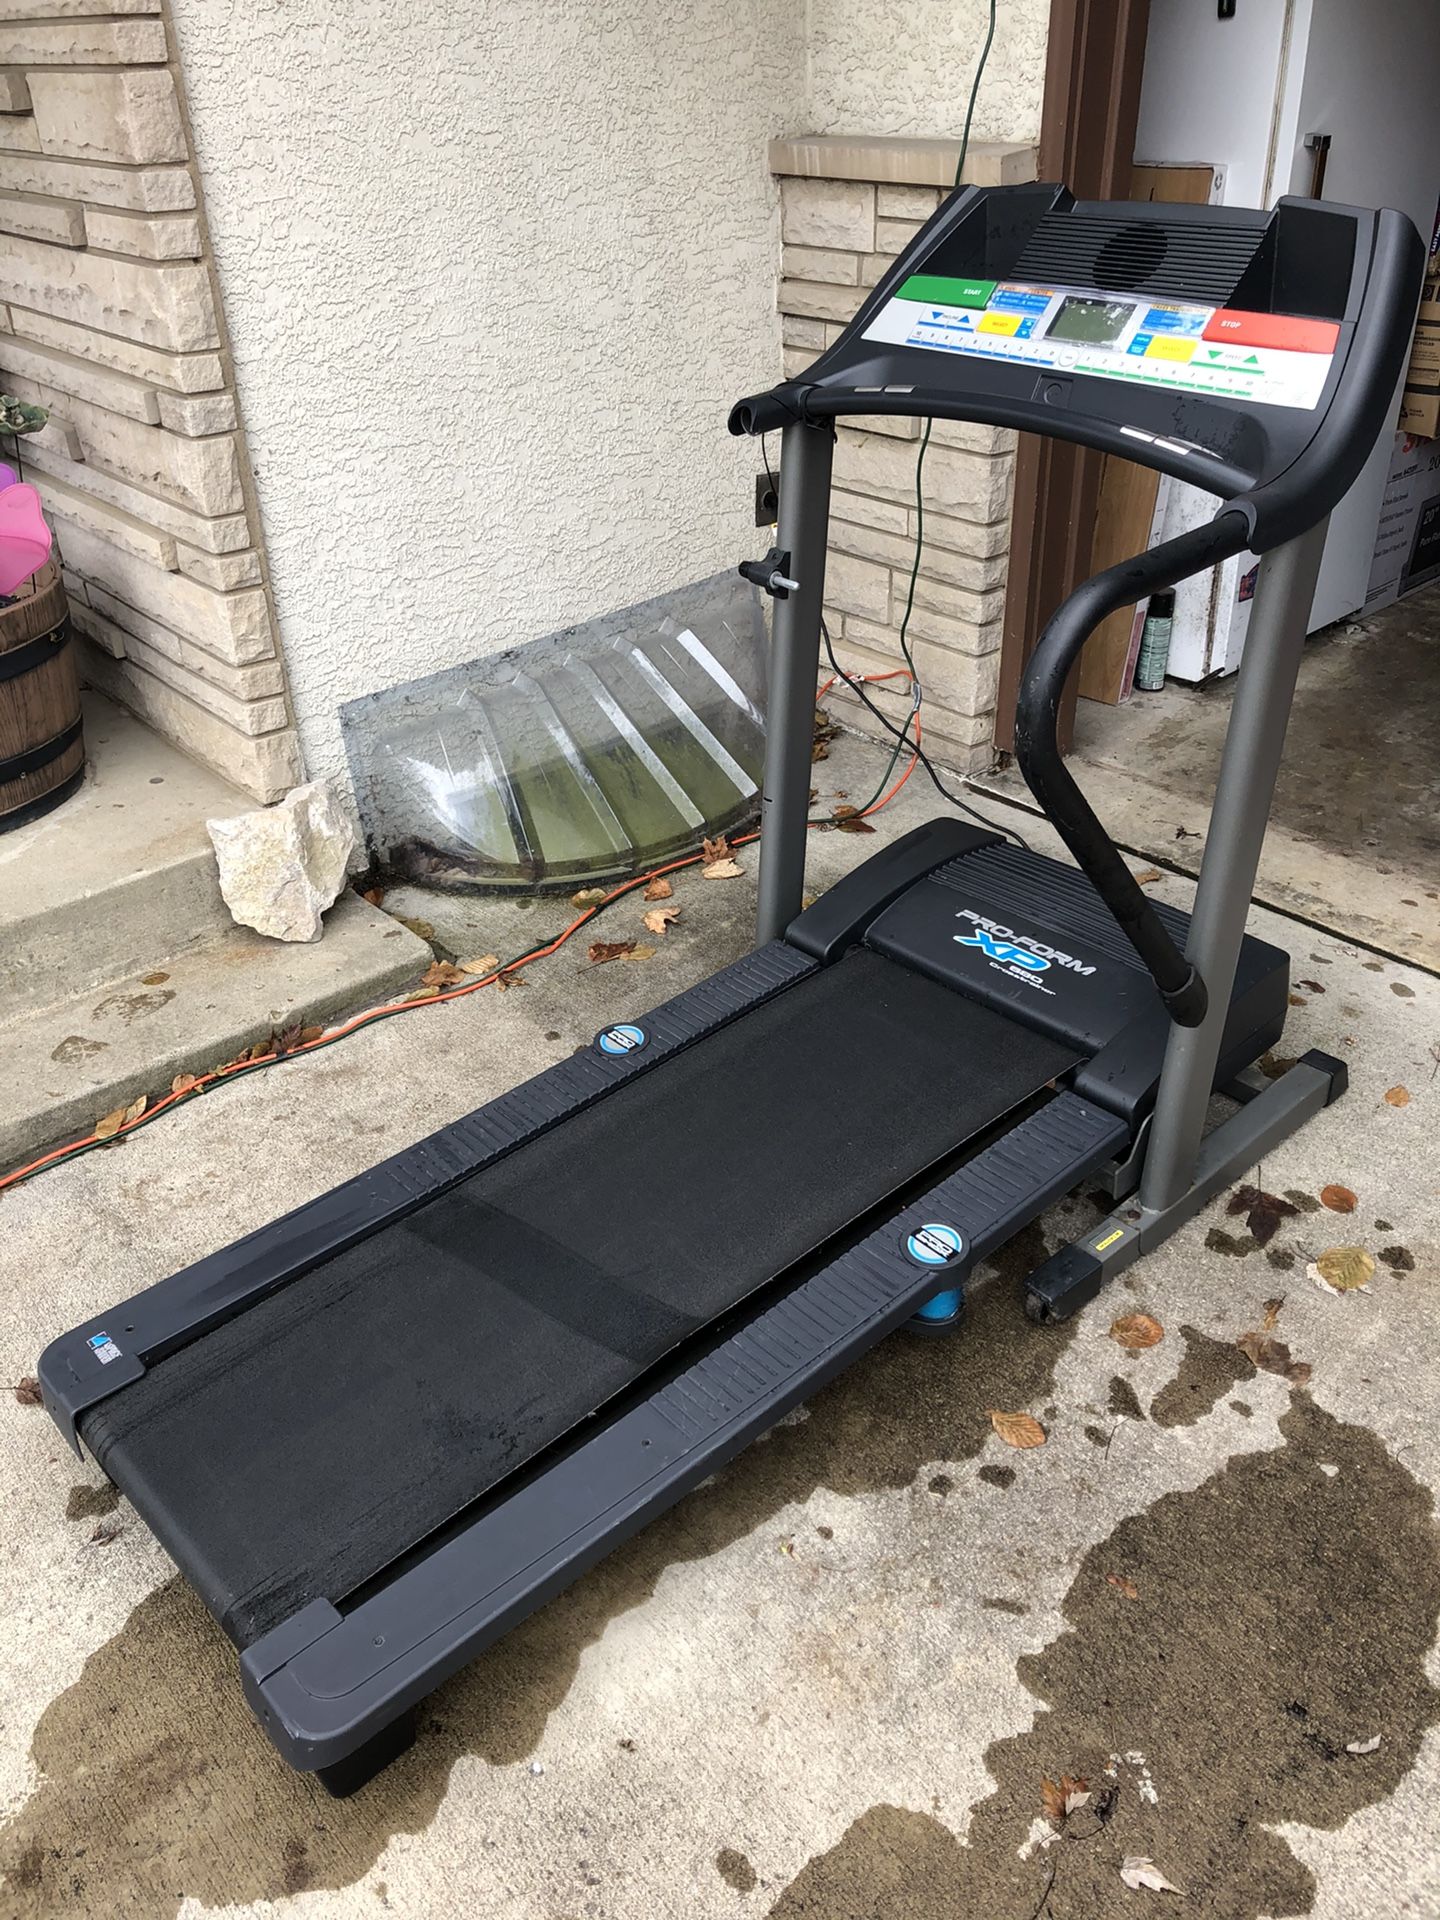 PRO FORM XP680 CROSSTRAINER original price $800 missing one hand rail pick up only Hilliard area